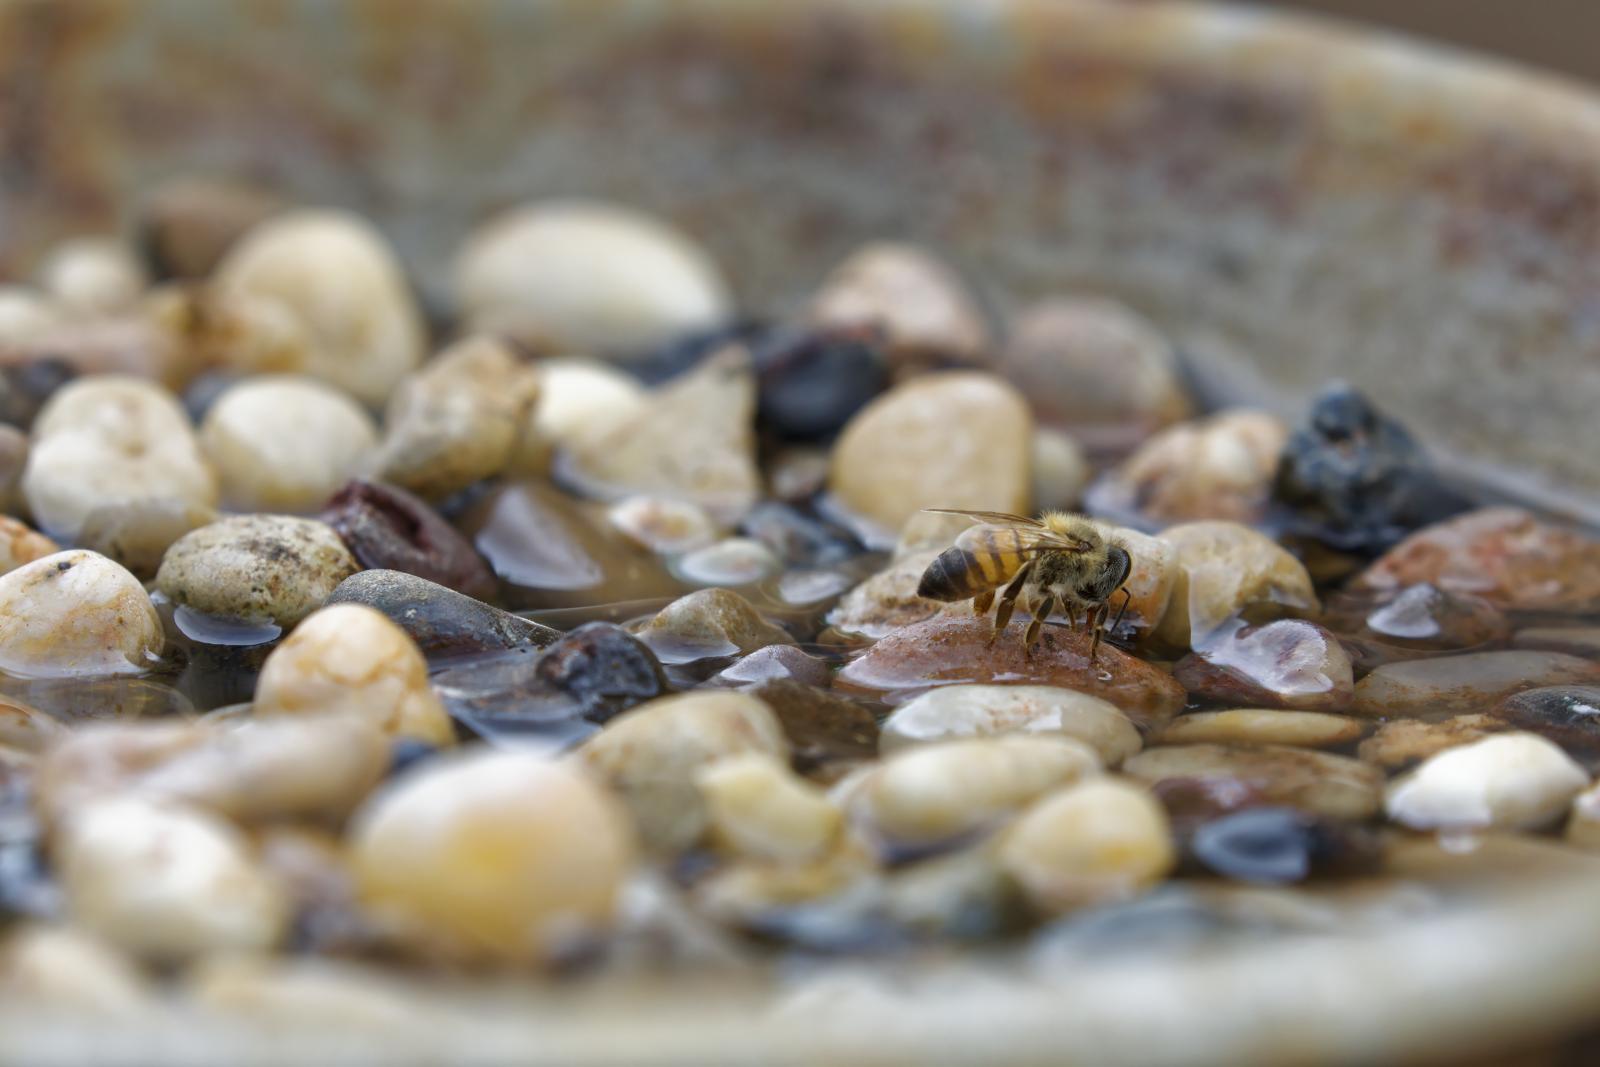 A drinking bowl for bees